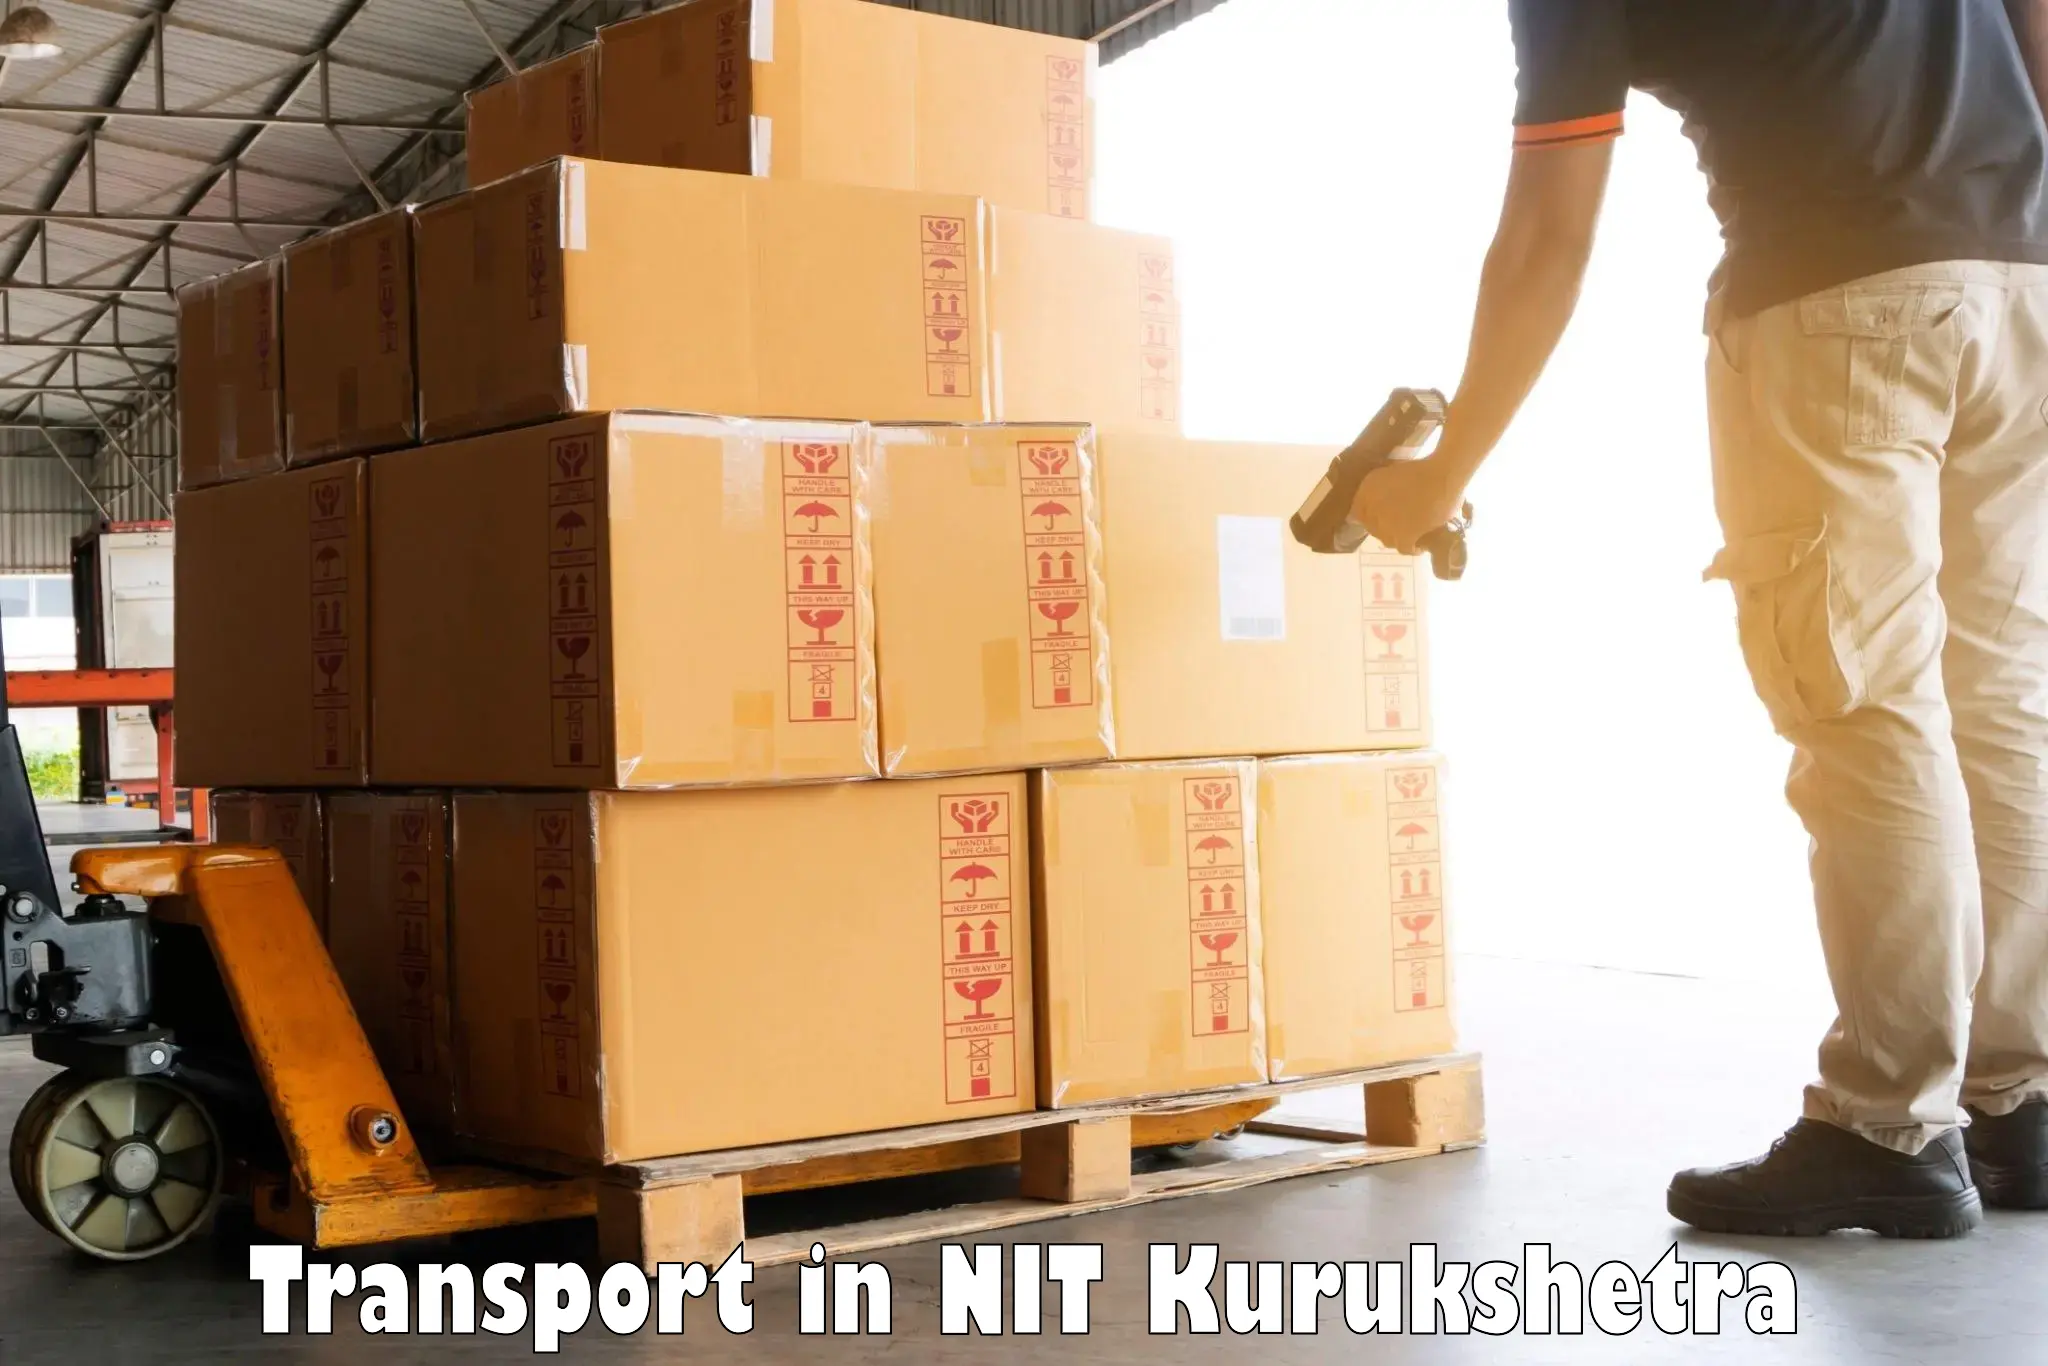 Transport bike from one state to another in NIT Kurukshetra